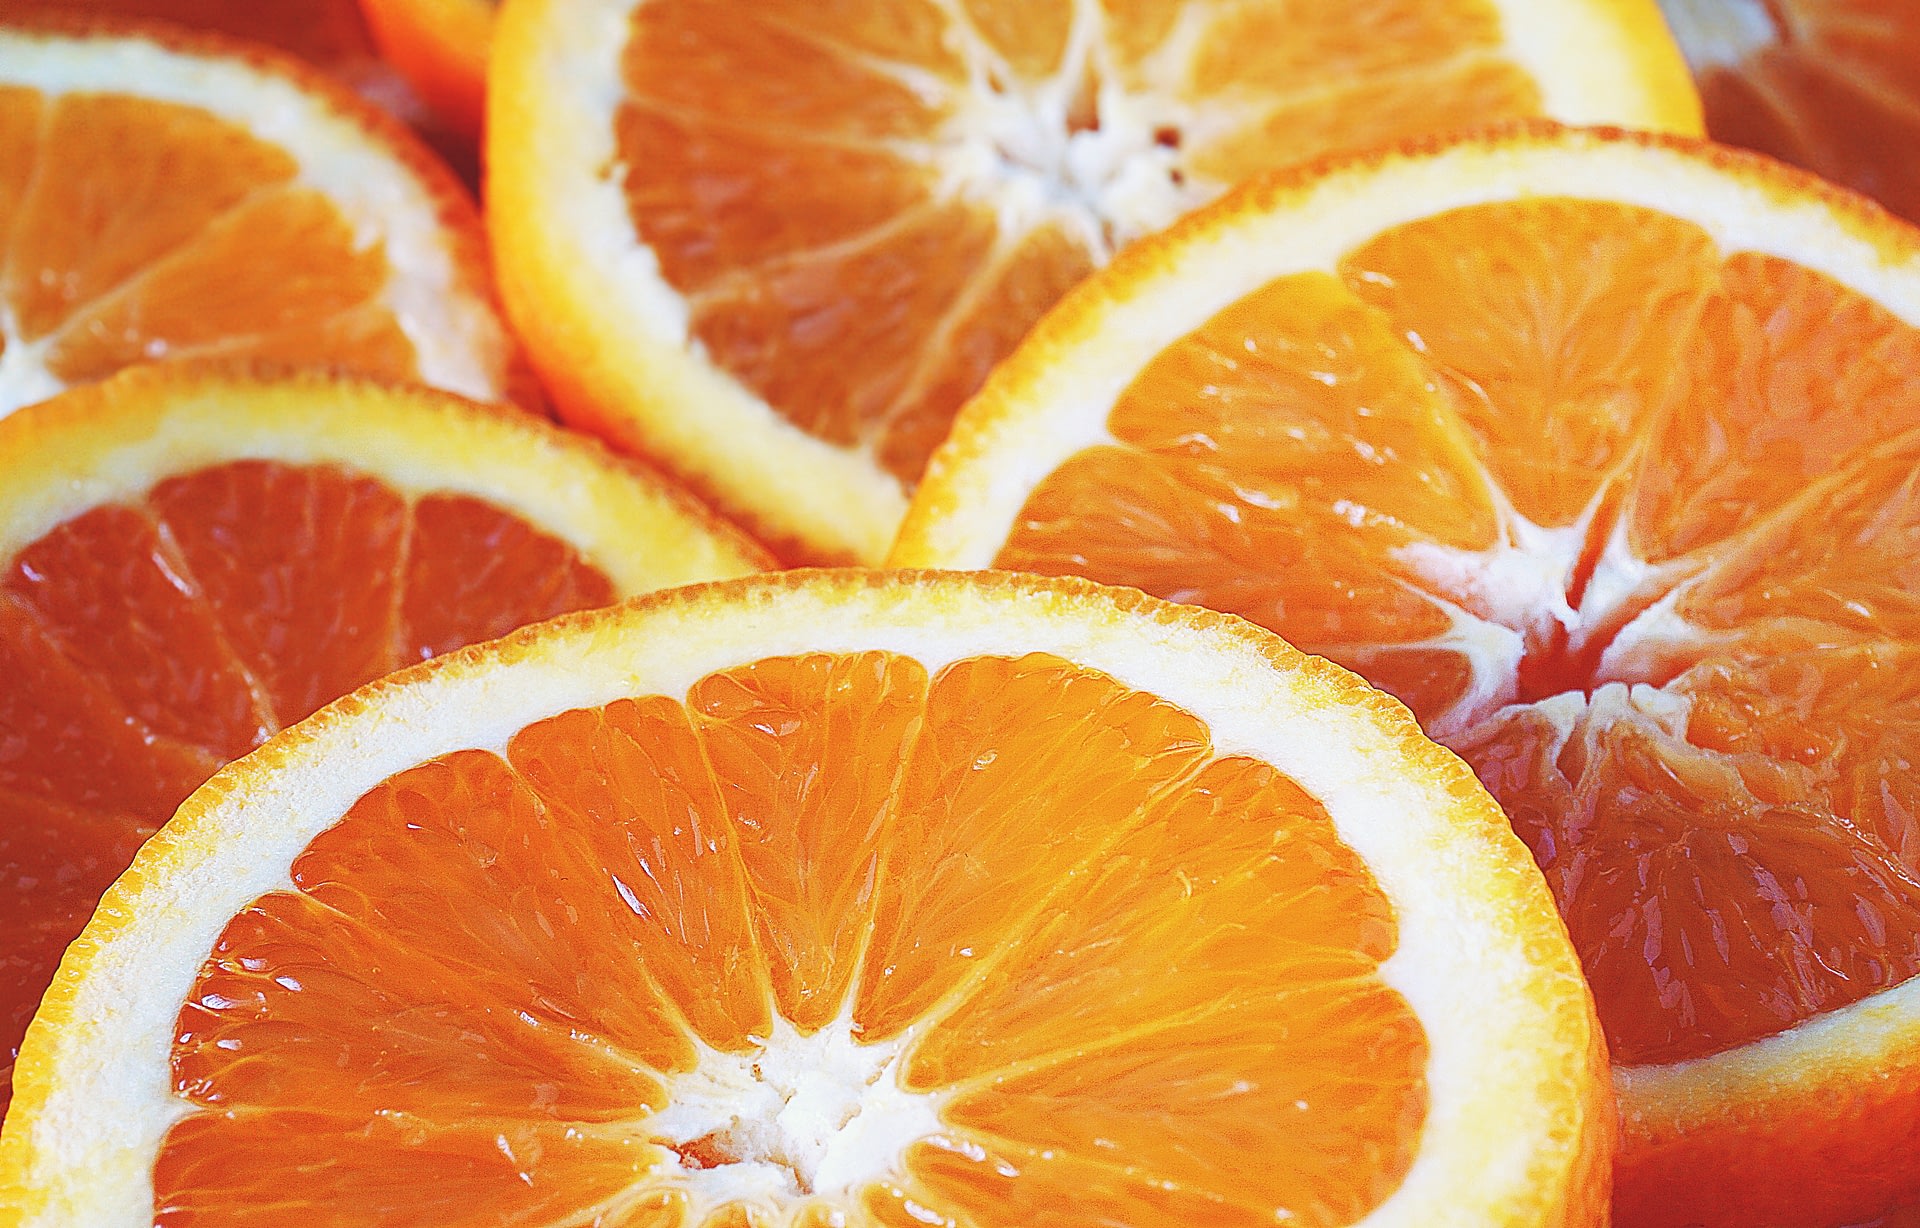 Juicy, bright oranges are fine for people with diabetes